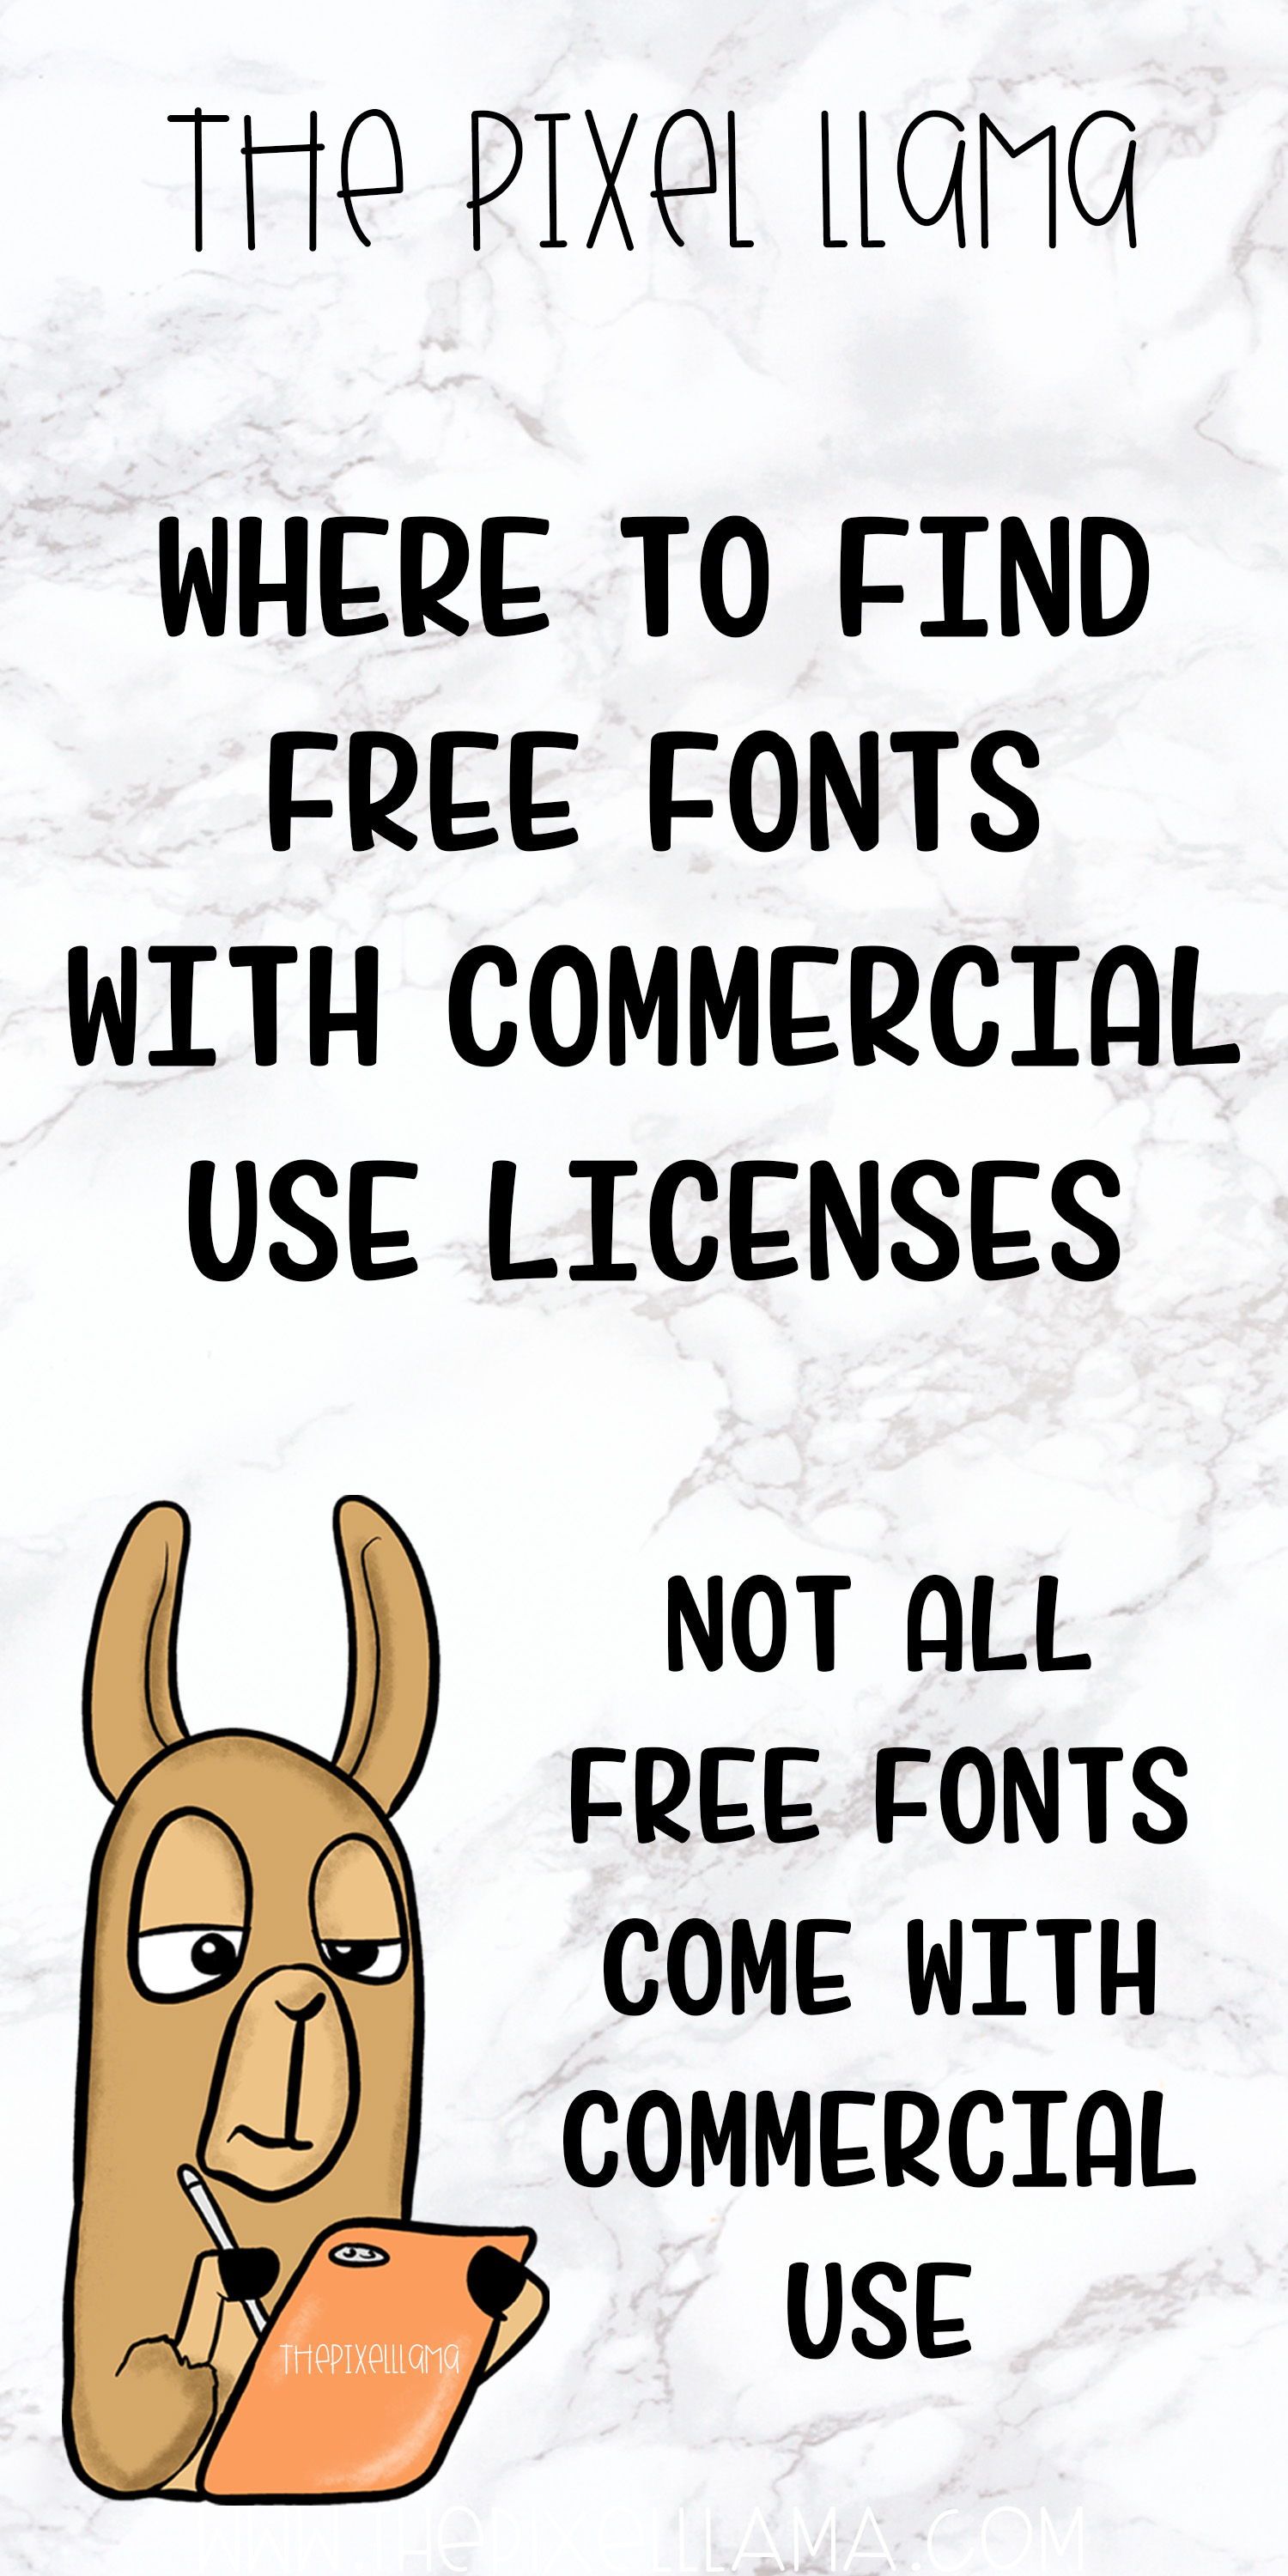 find my font free download